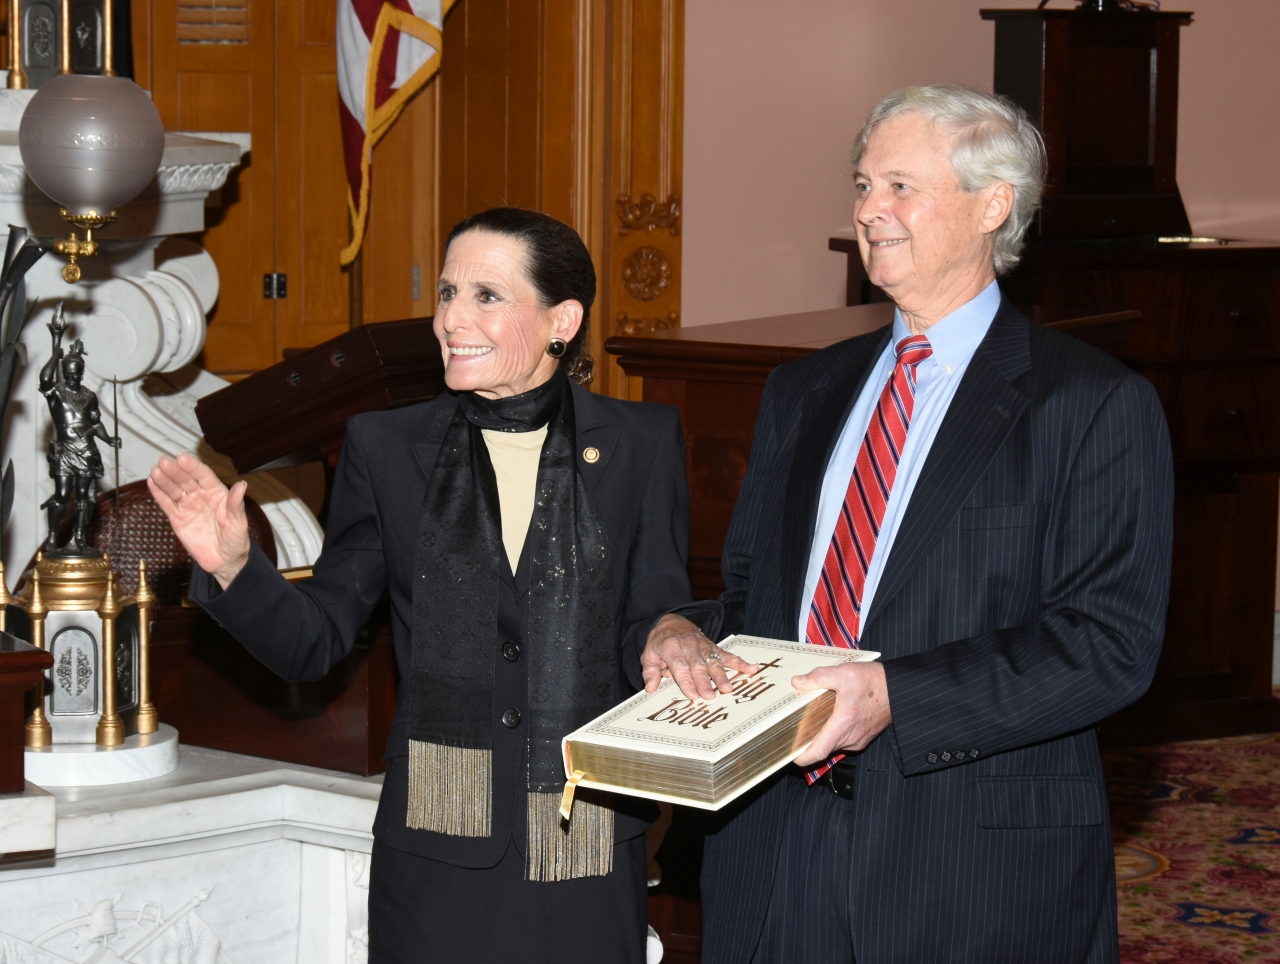 Rep. Schmidt stands alongside her husband as she takes the oath of office.